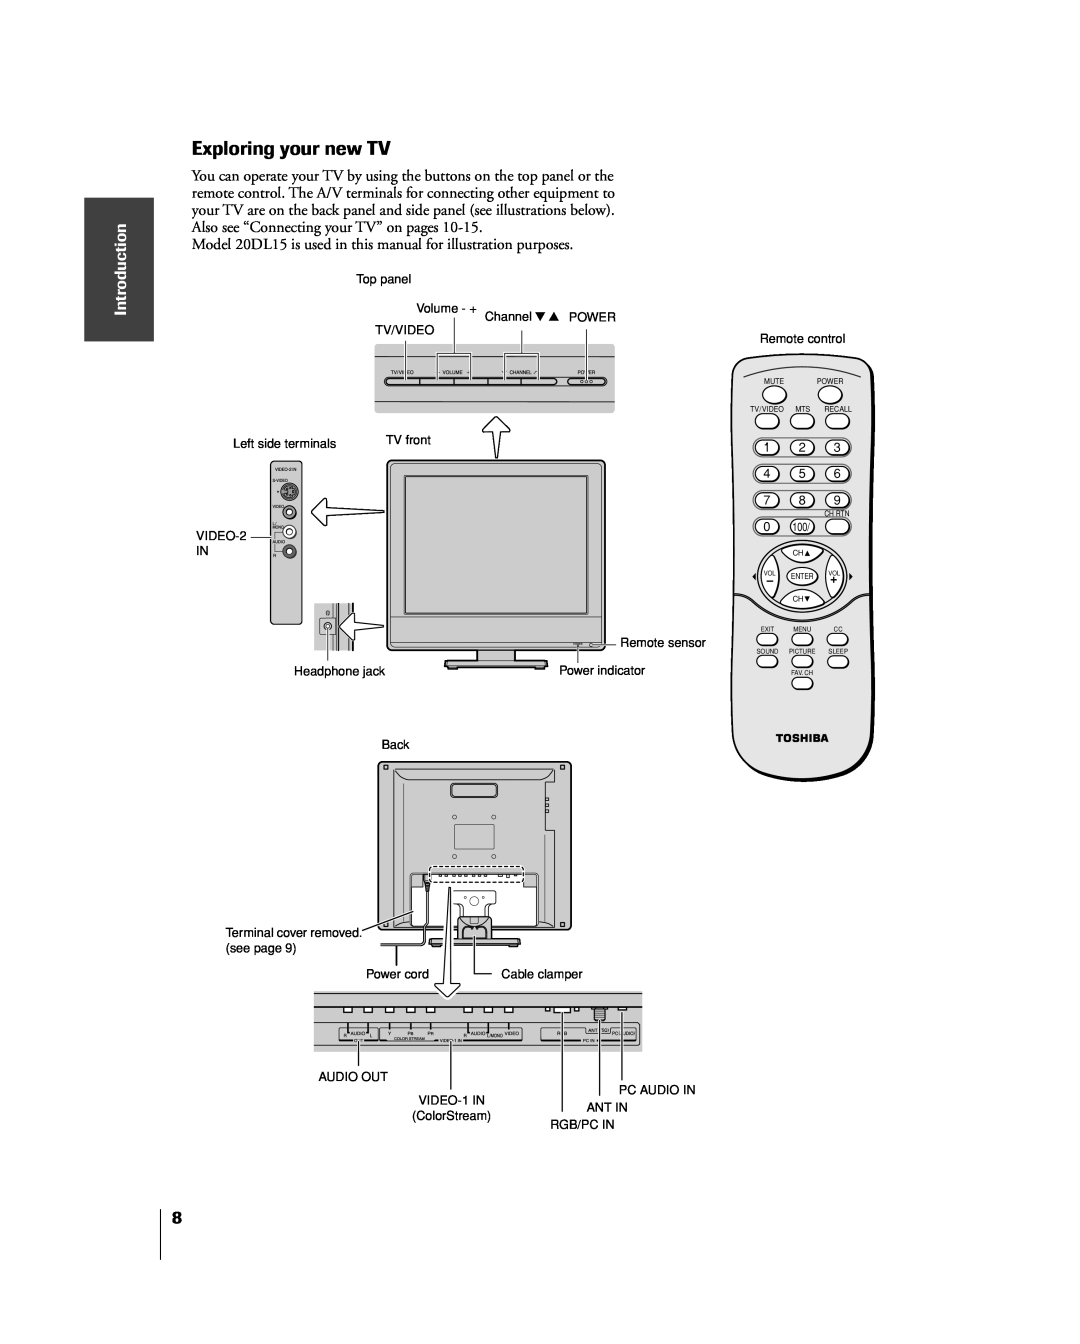 Toshiba 15DL15 Exploring your new TV, Introduction, Model 20DL15 is used in this manual for illustration purposes 